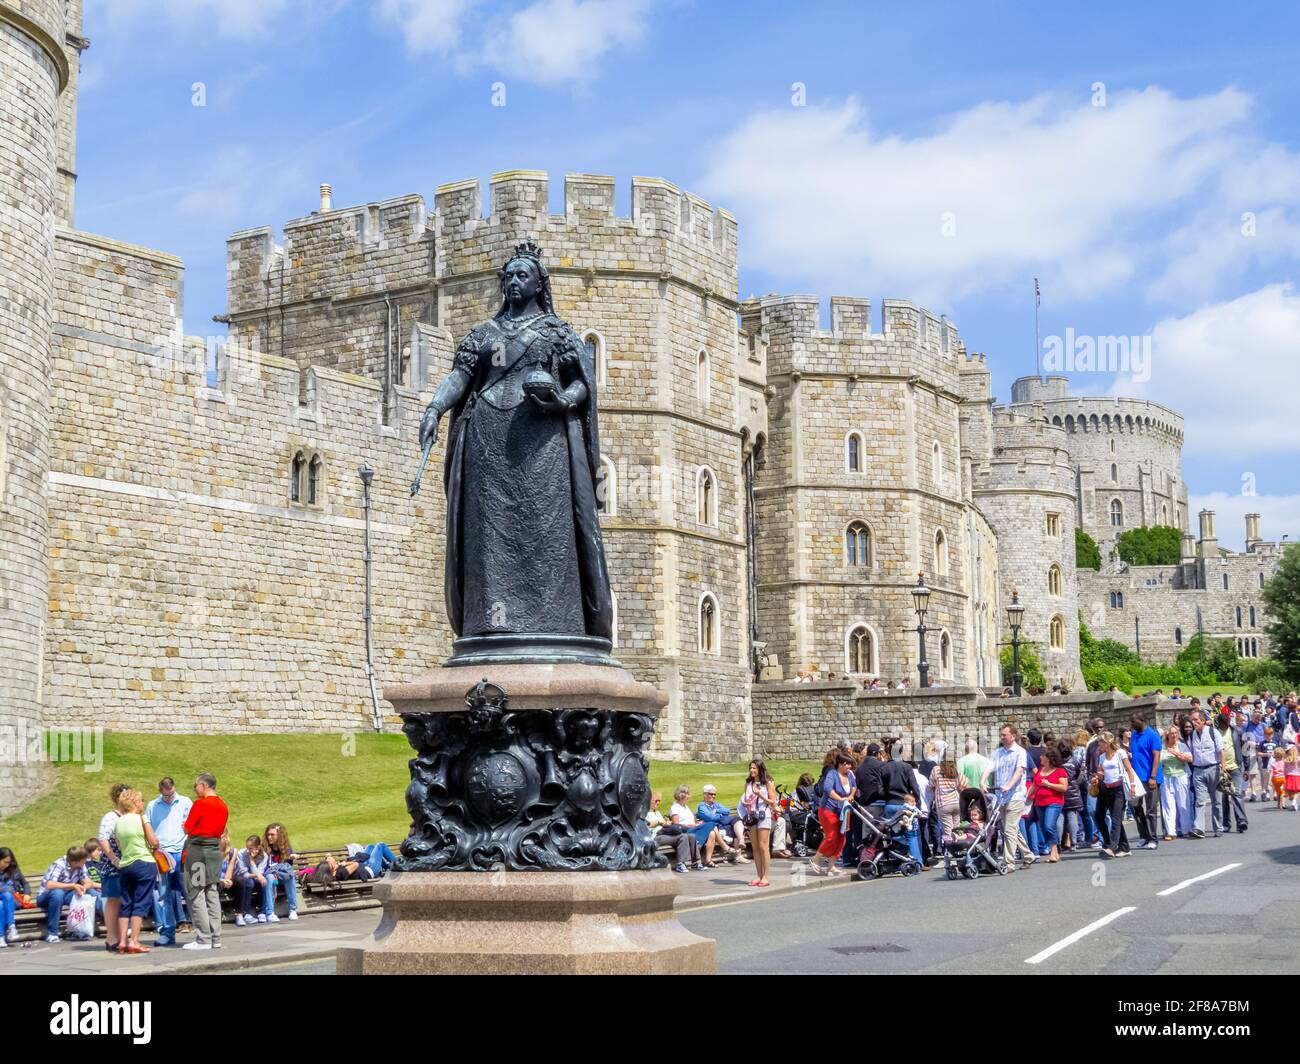 Crowds by the statue of Queen Victoria in Castle Hill outside the walls of Windsor Castle in Windsor, Berkshire, UK on a sunny day Stock Photo